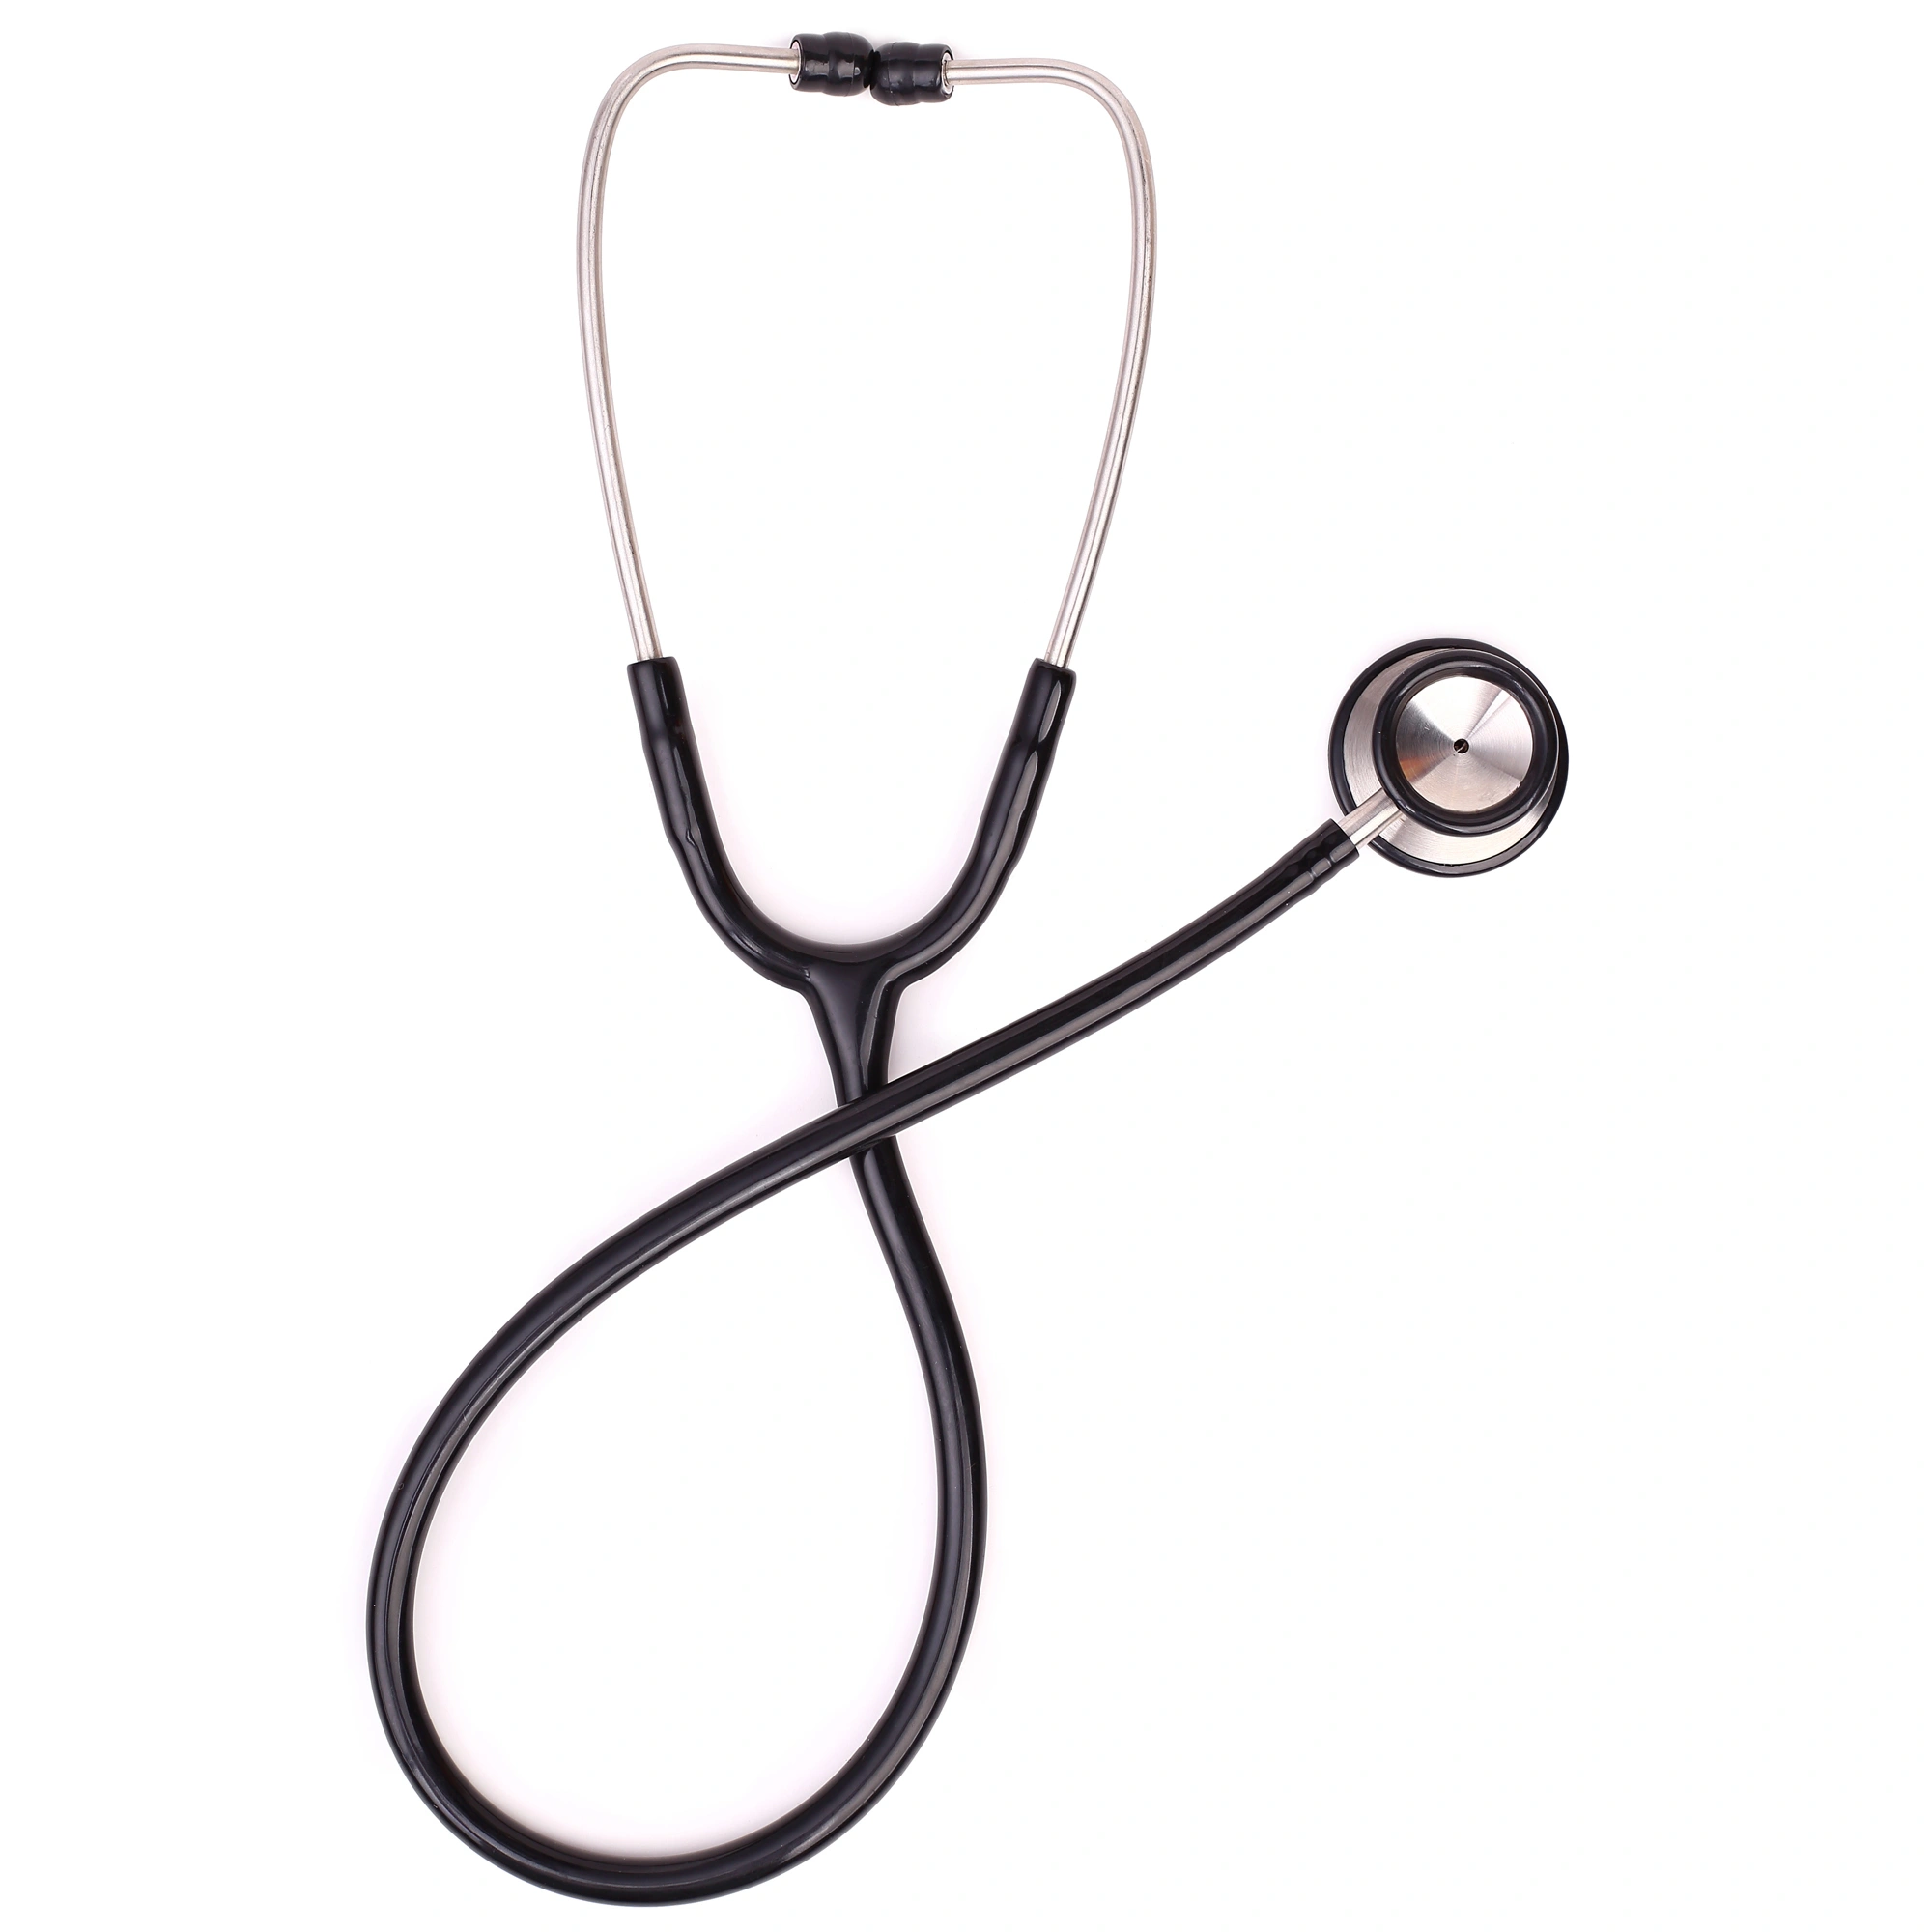 Acoustic Stethoscope Supplier